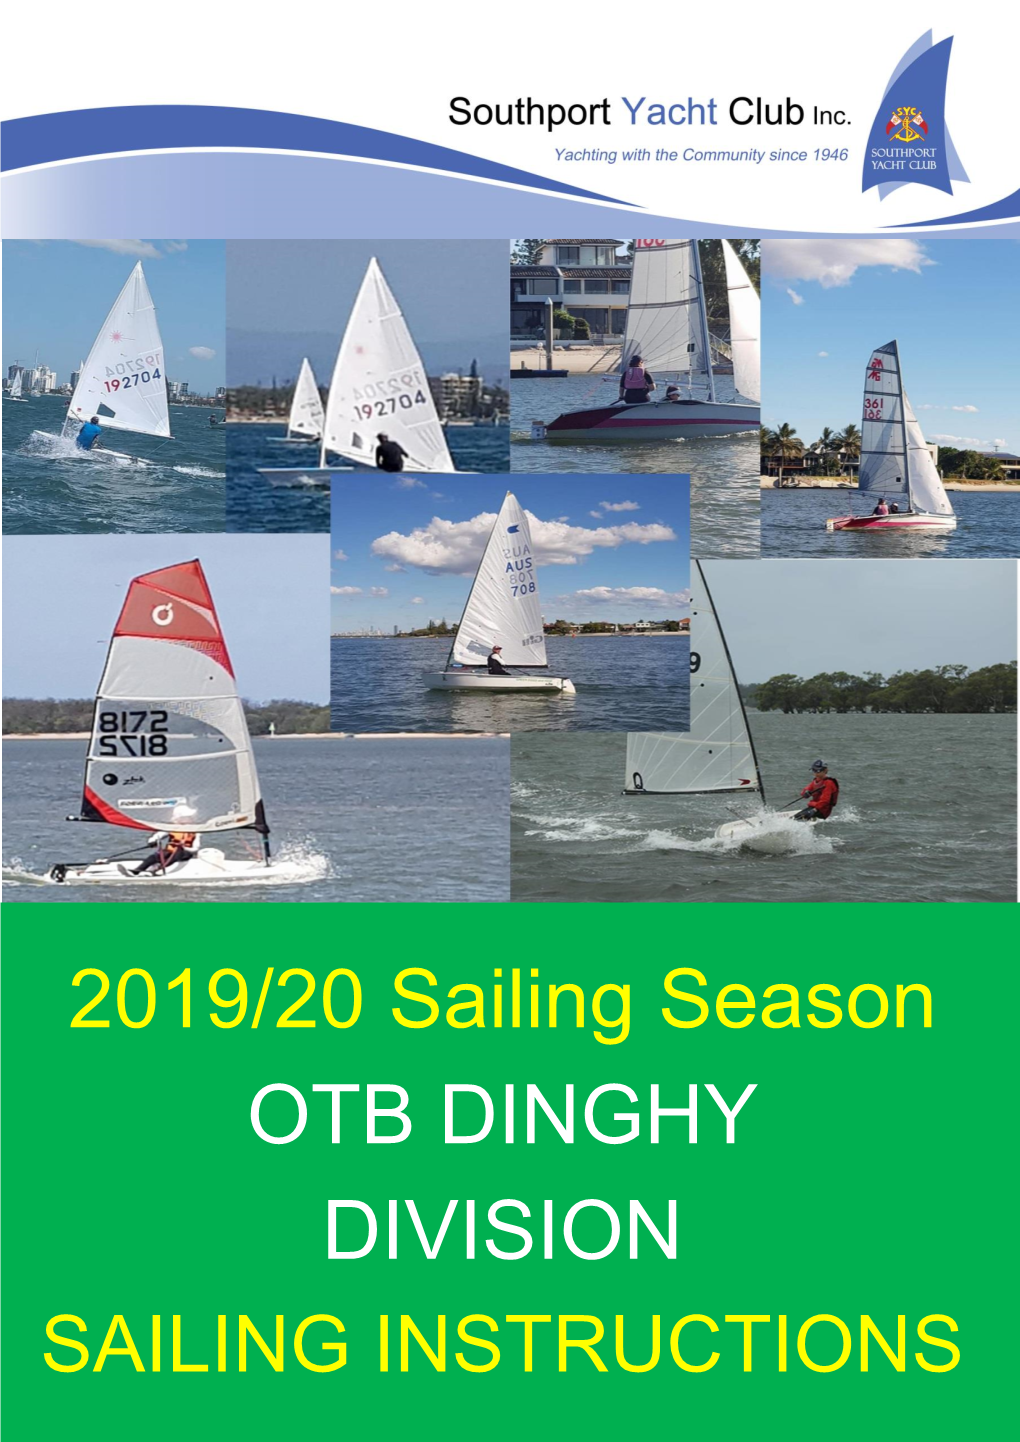 Sailing Instructions Otb Dinghy Division – 2019/20 Sailing Instructions